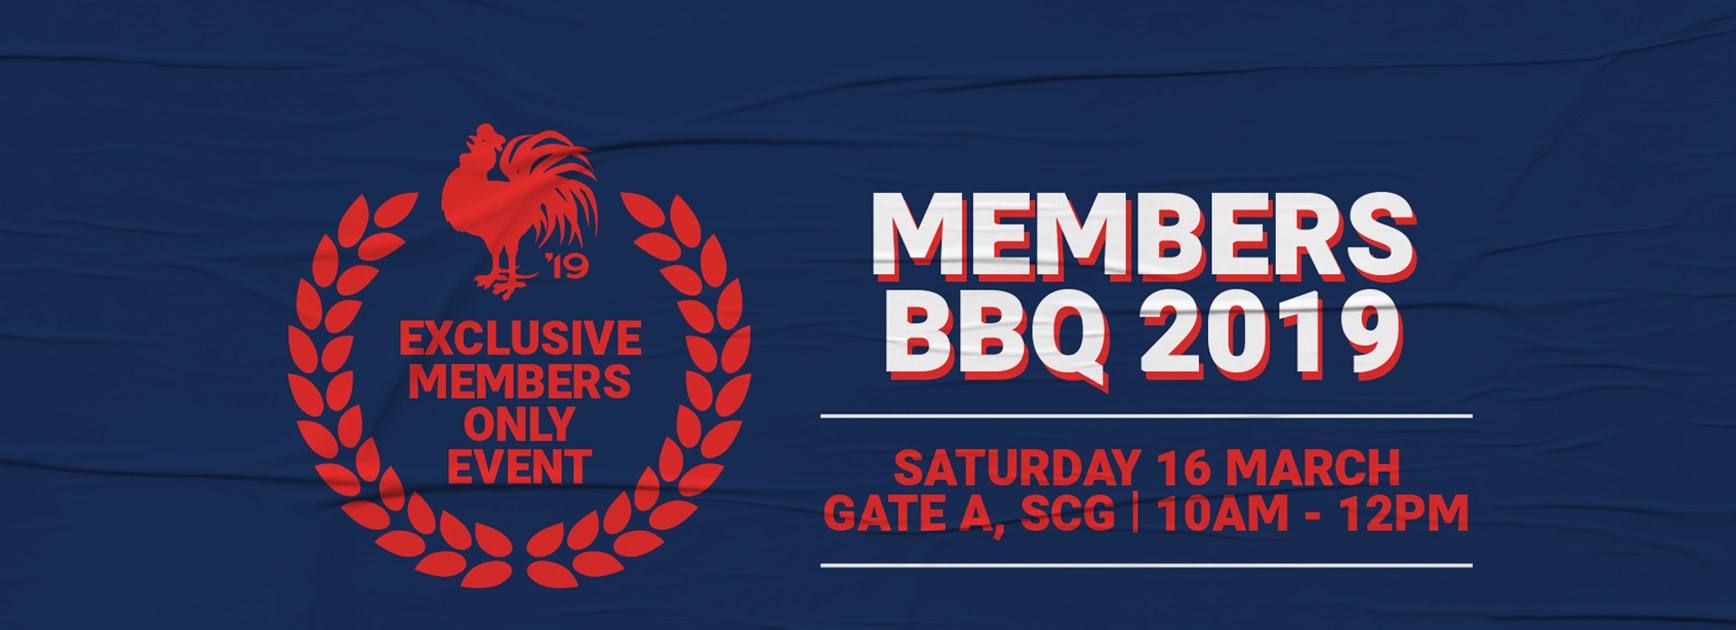 Sydney Roosters Members BBQ